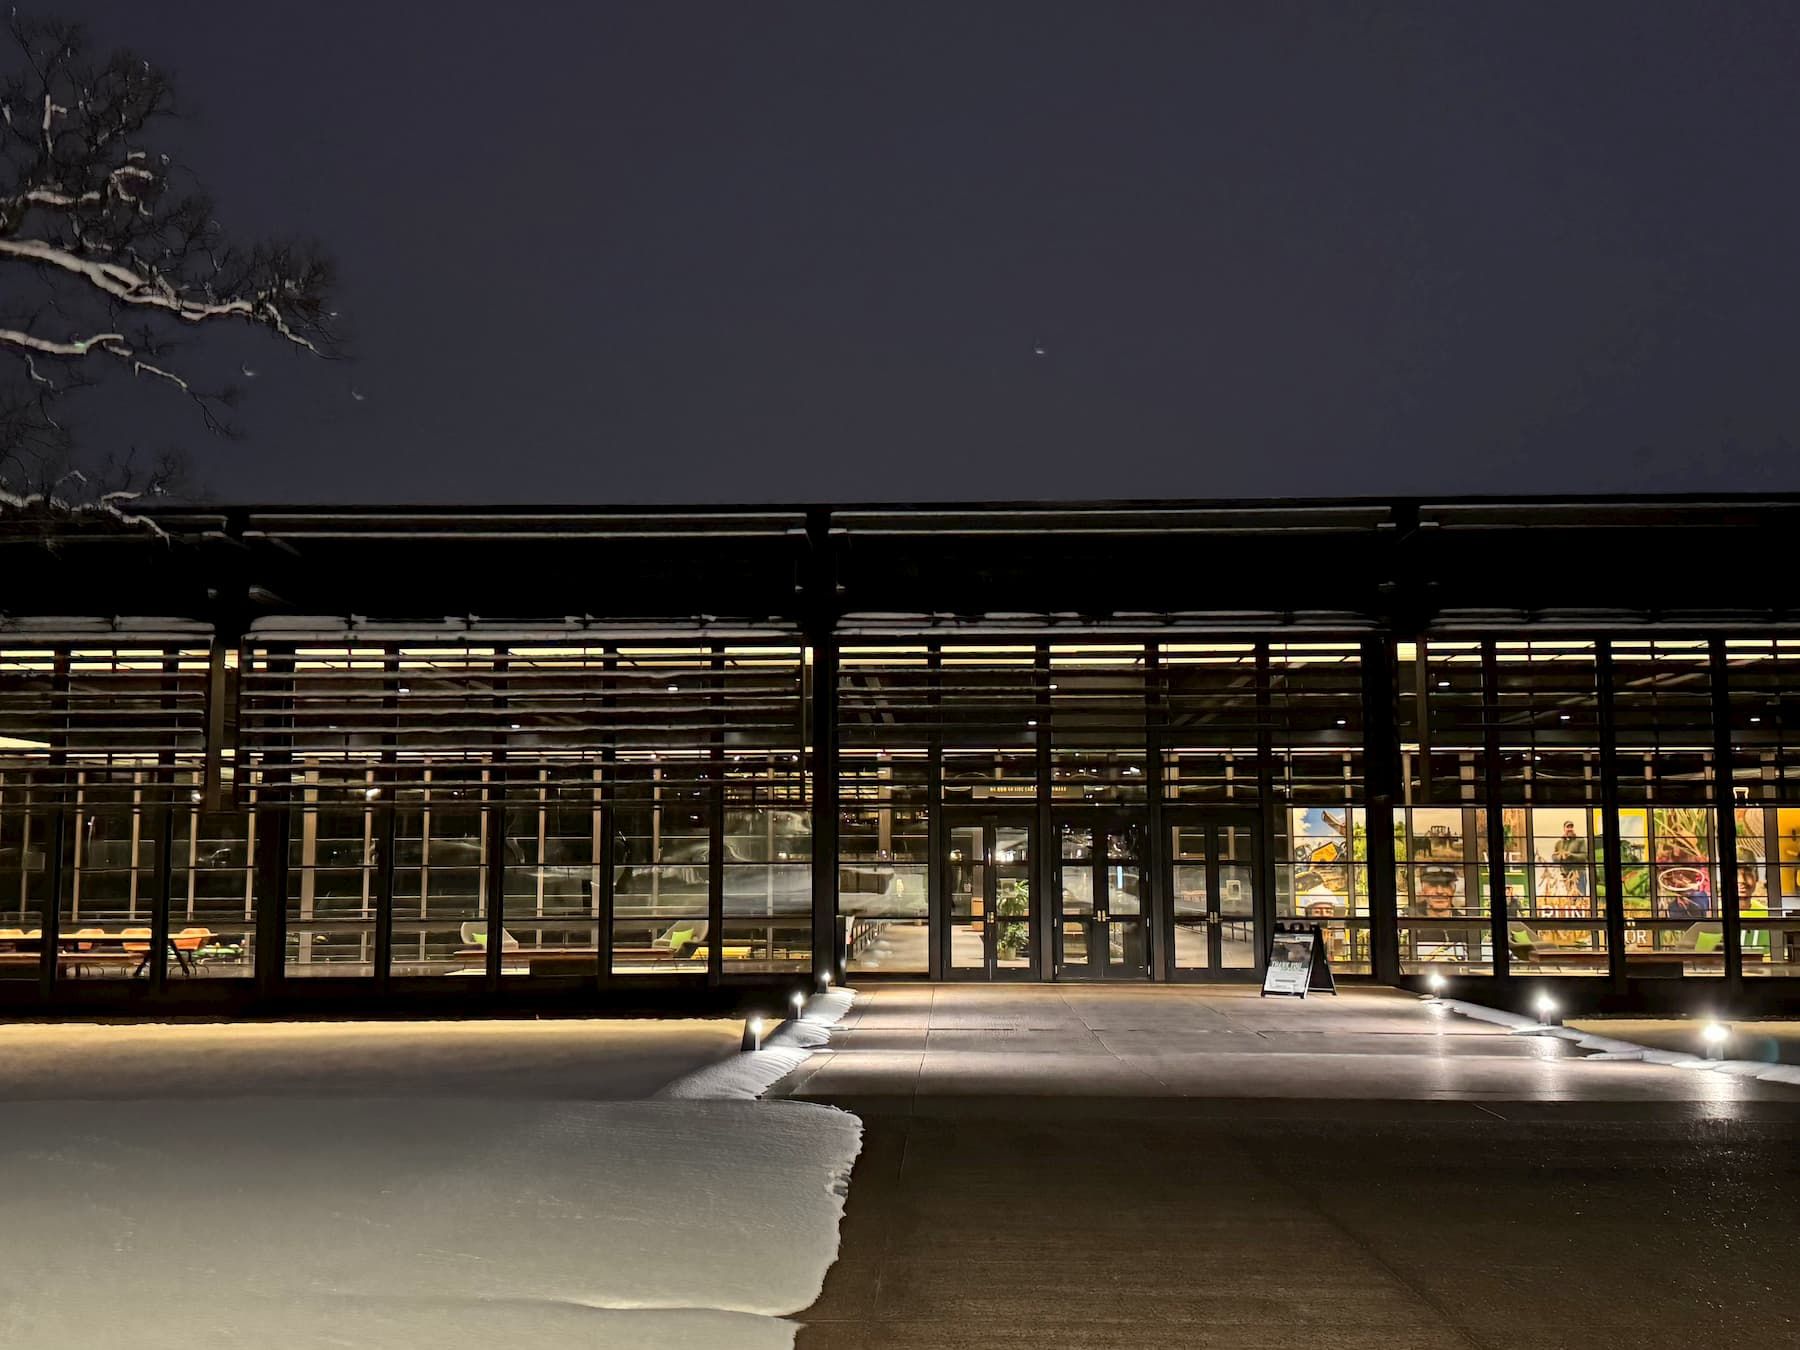 Modern building with large, illuminated glass windows during nighttime. The building is long and rectangular, with visible structural beams. Various colorful displays are inside but not clearly identifiable. The groundis covered in snow, reflecting light from the windows.